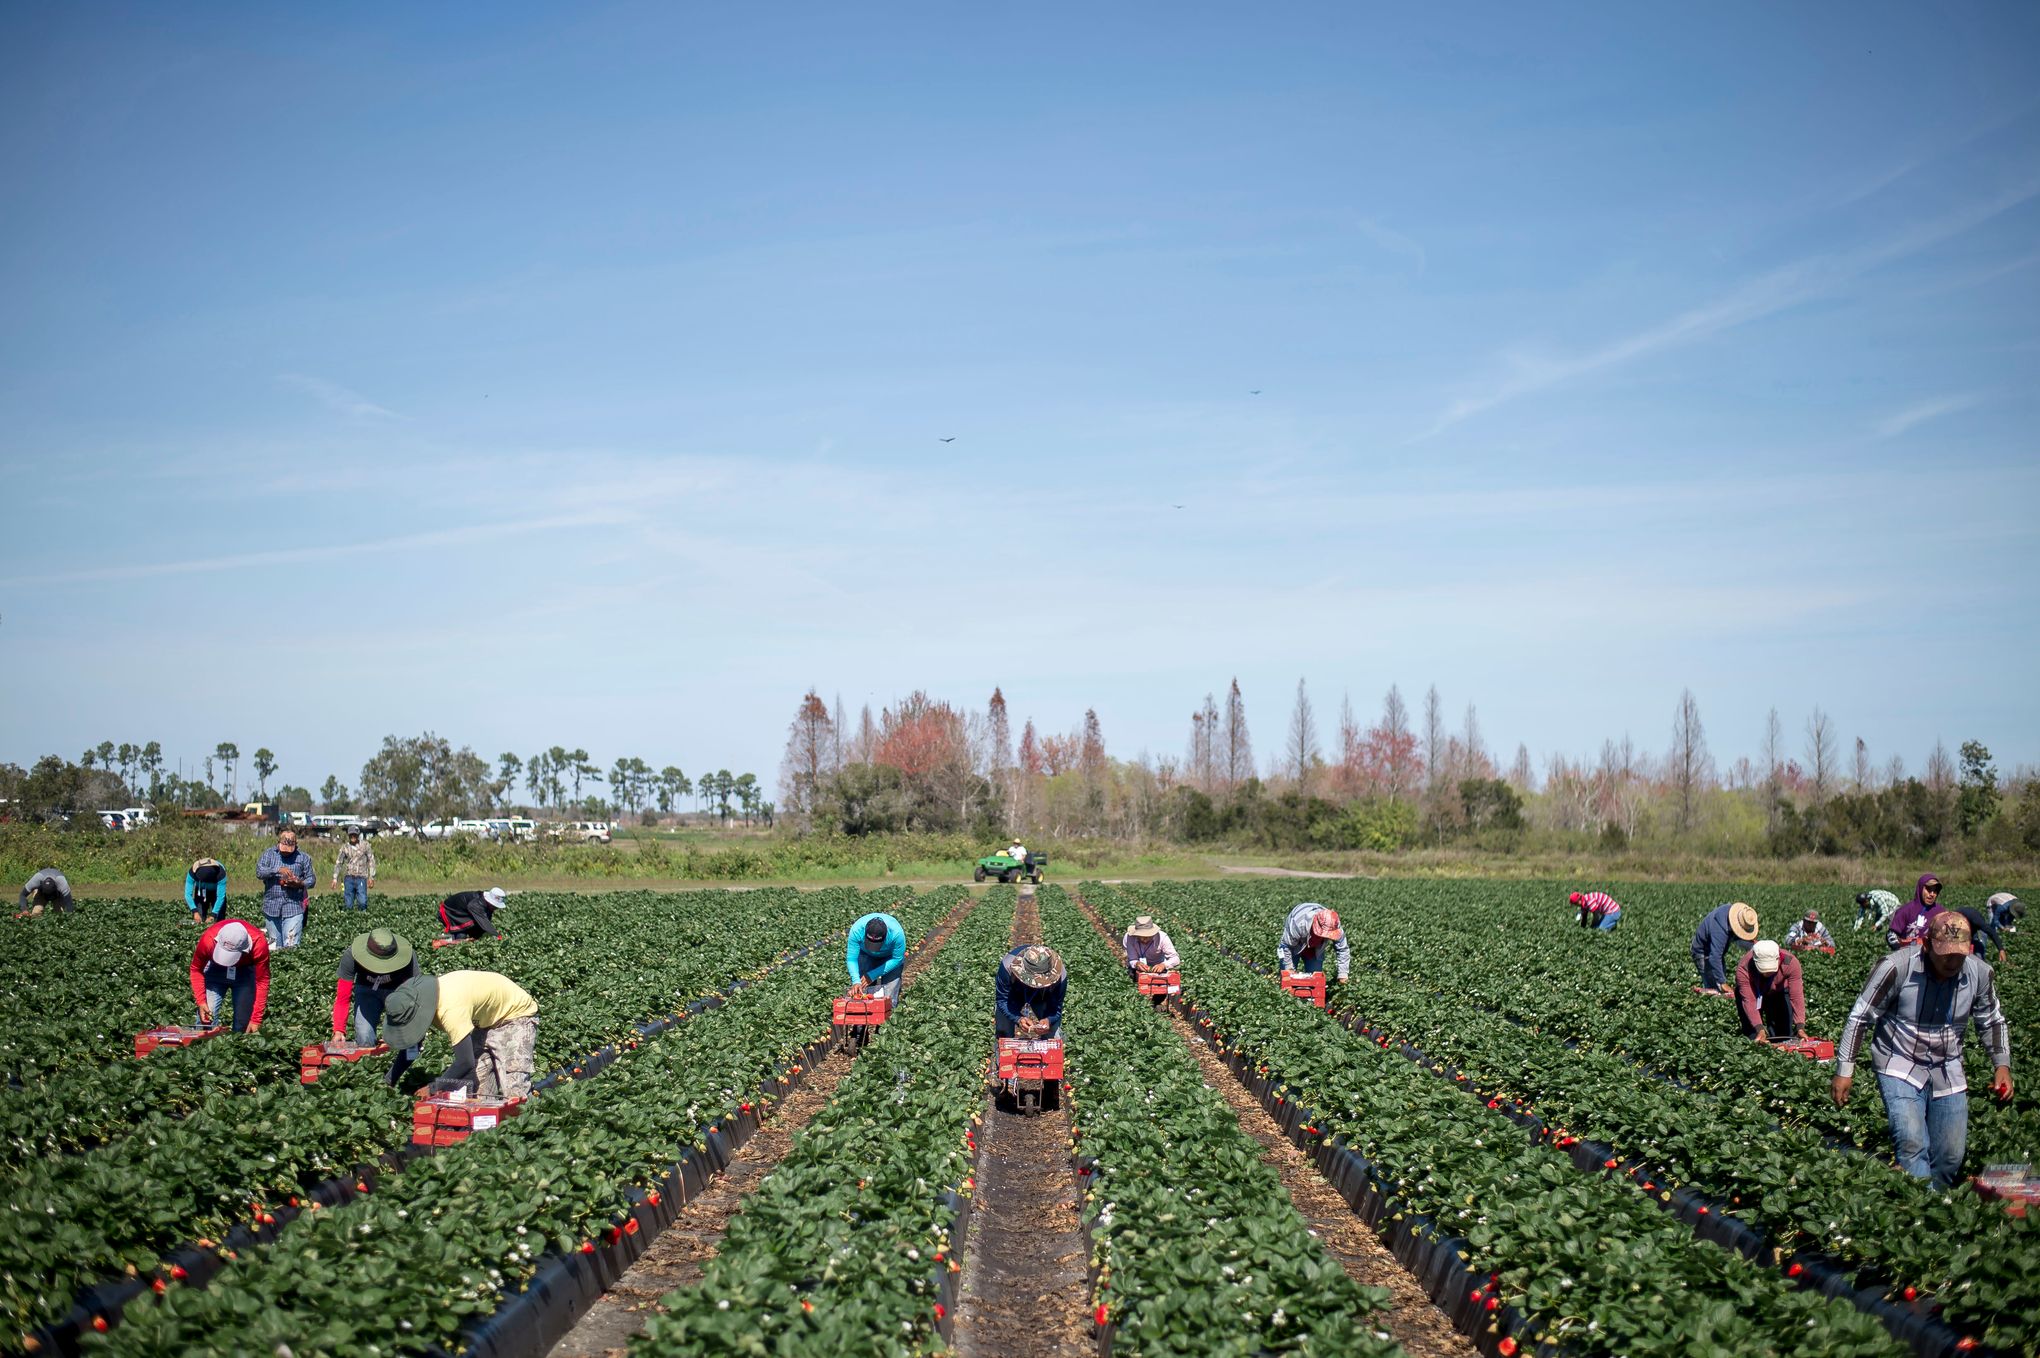 How the produce aisle looks to a migrant farmworker